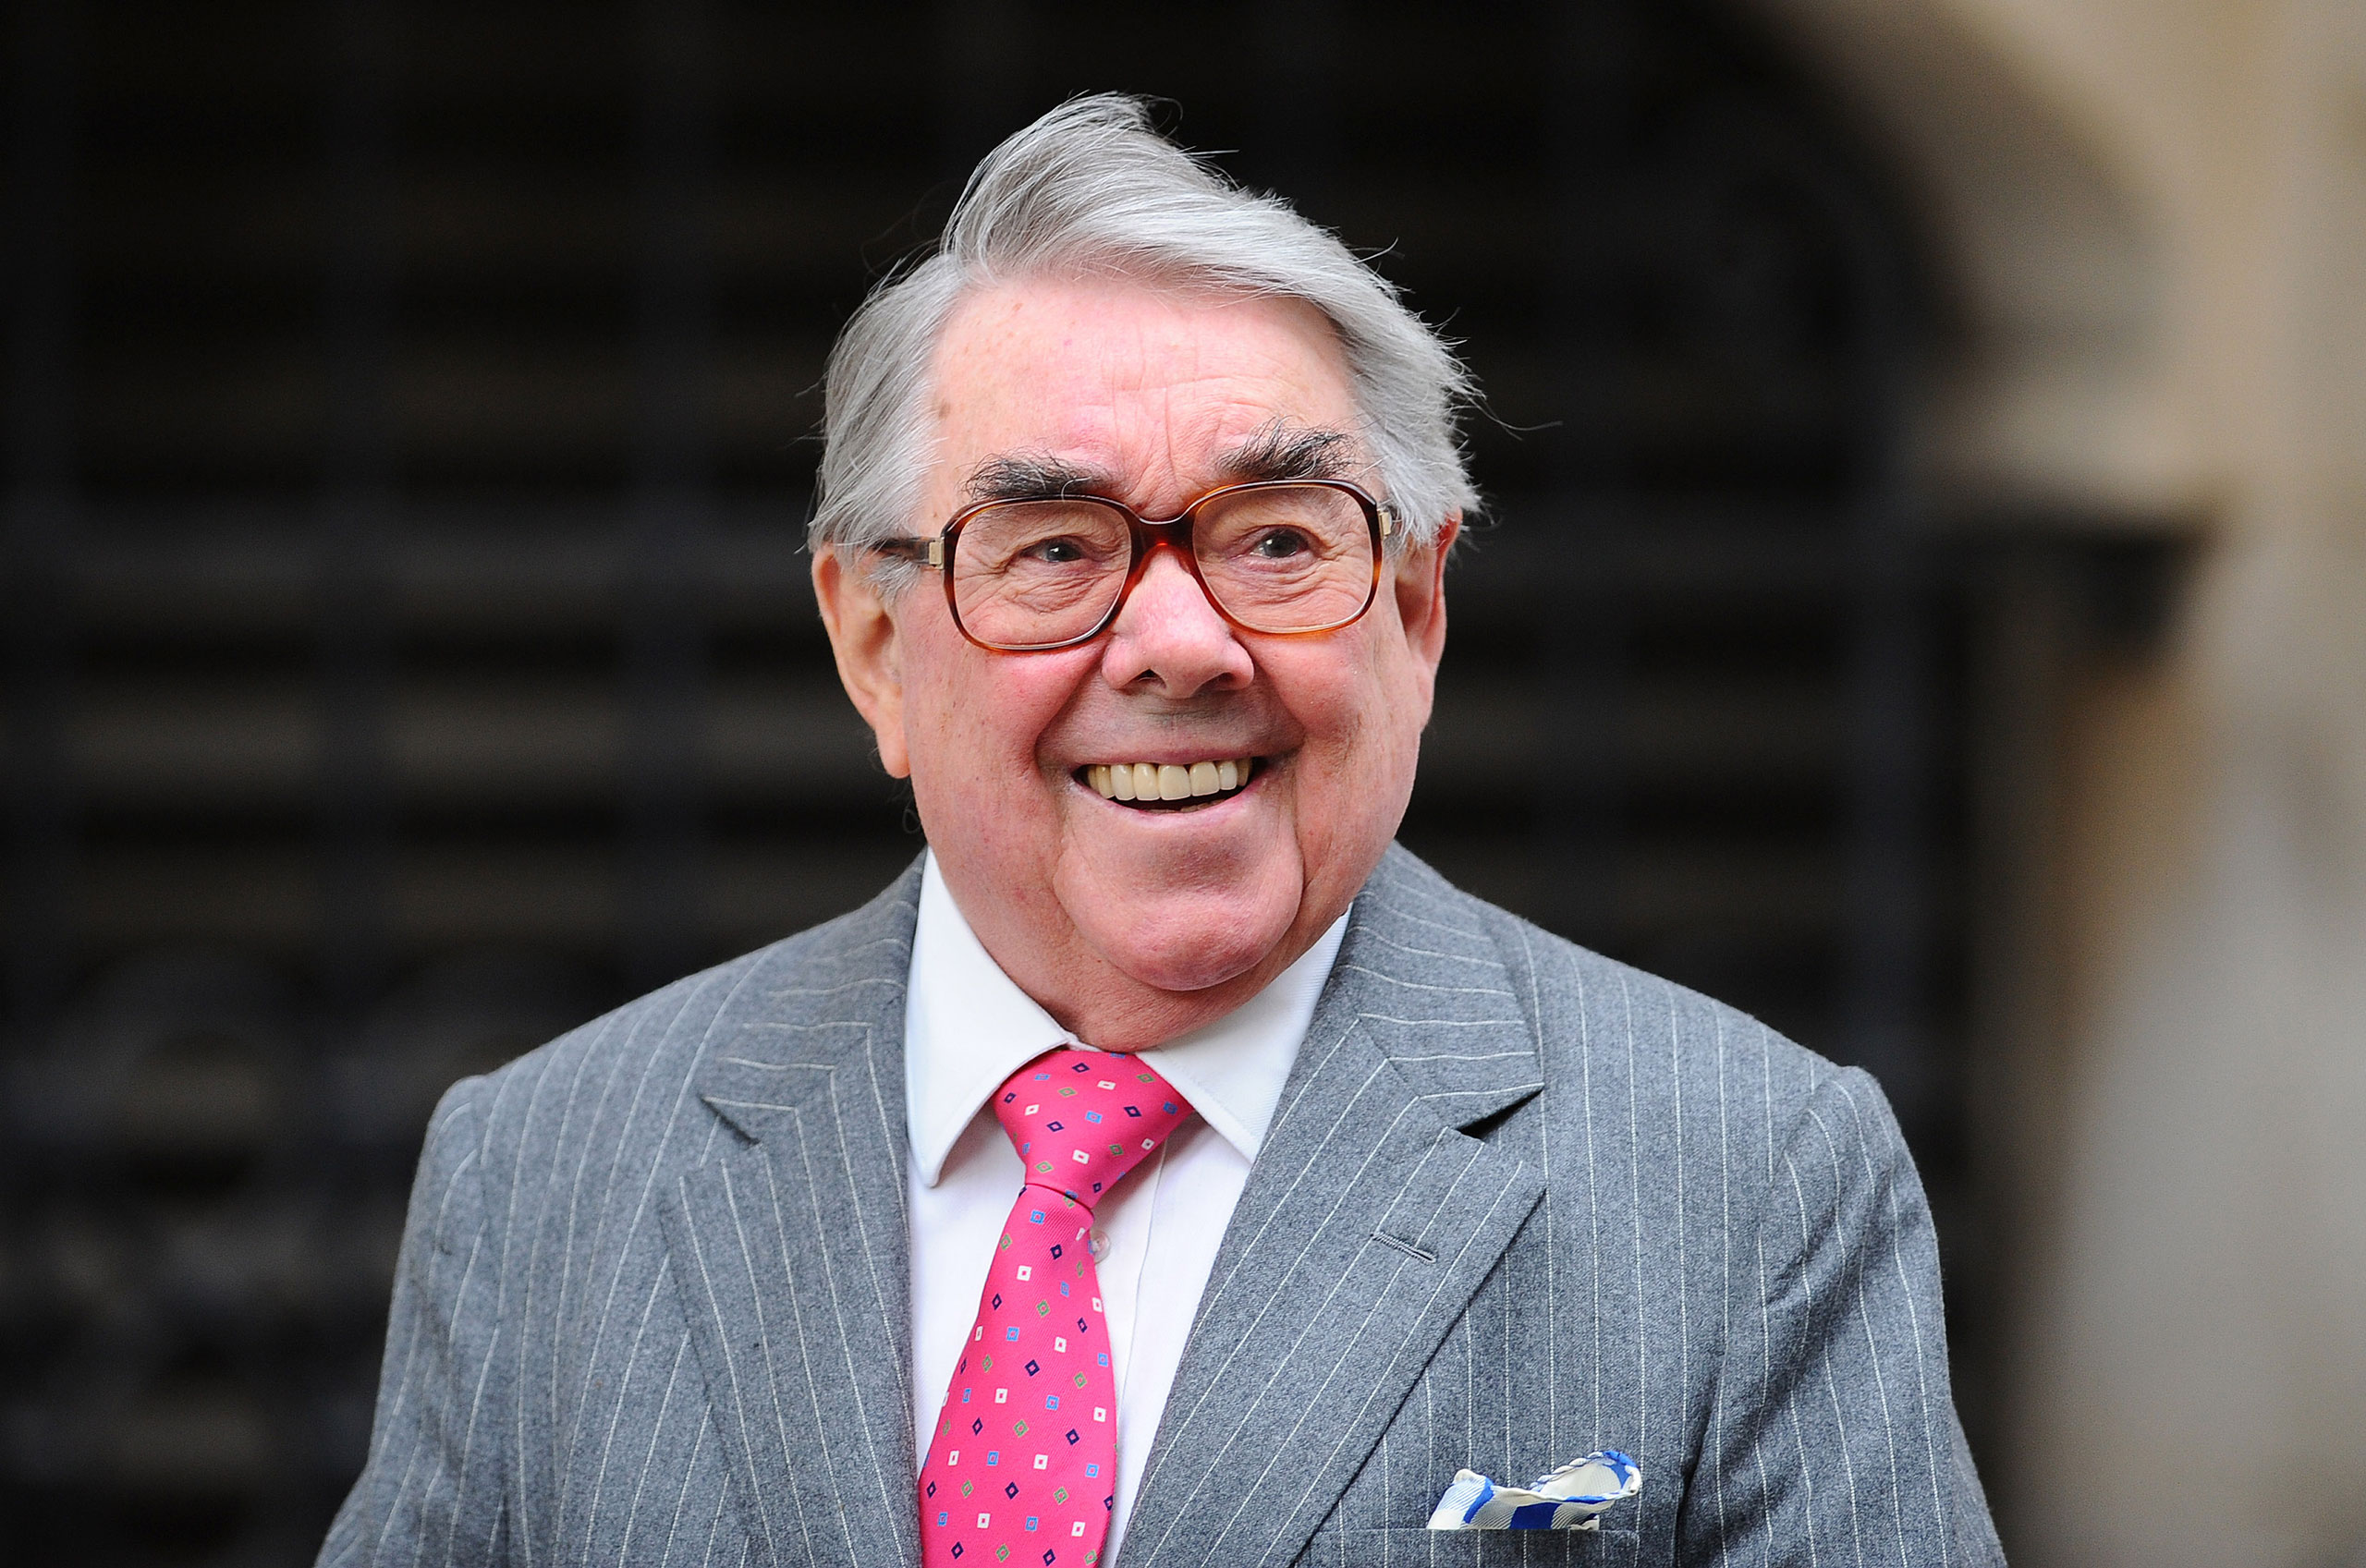 Ronnie Corbett attends a reception for the Best of Britain's Creative Industries at The Foreign Office in London, June 30, 2014. (Stuart C. Wilson—Getty Images)